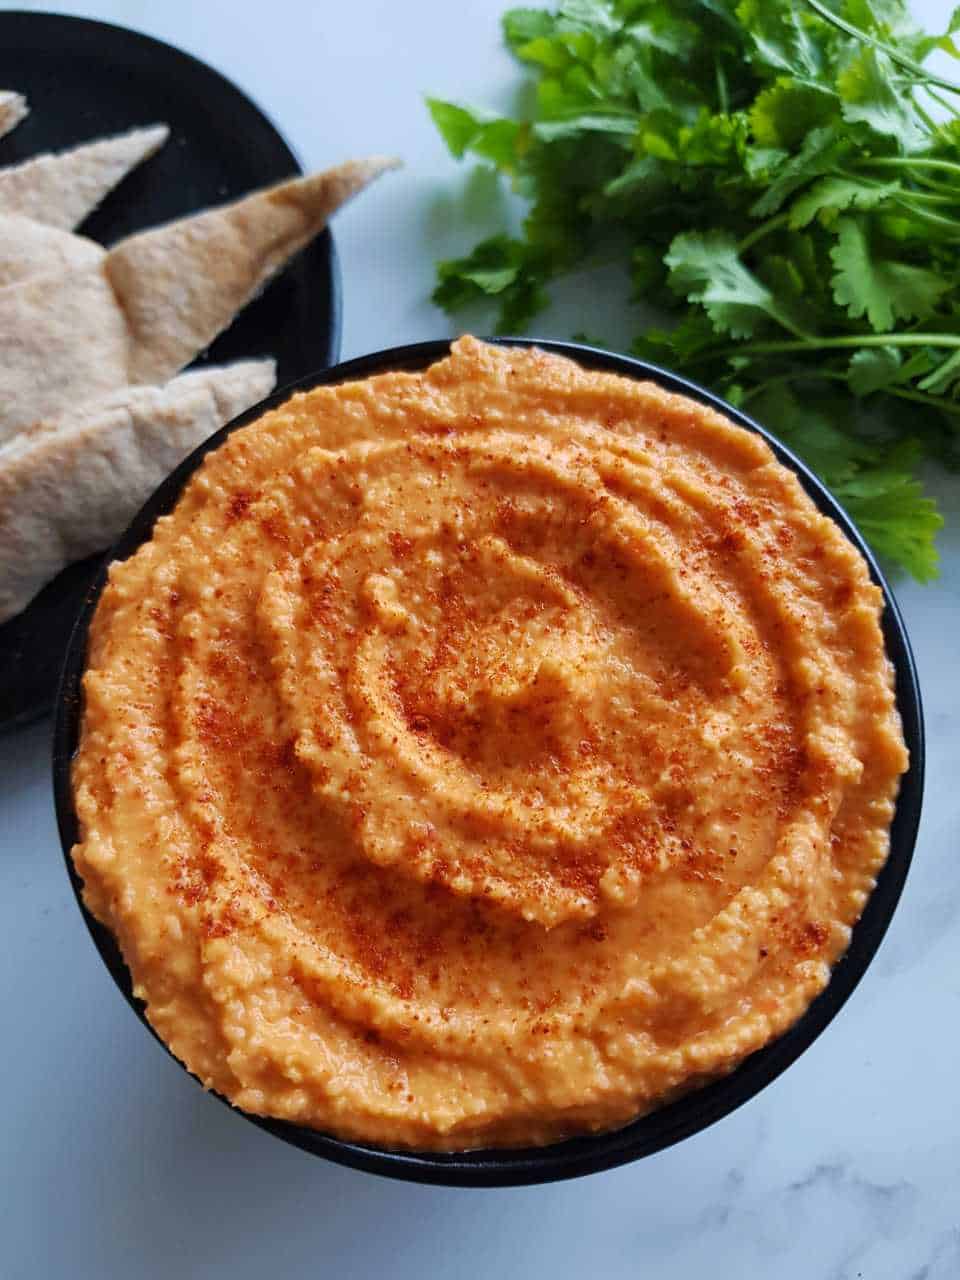 Red pepper hummus on a white table with cilantro and pita bread in the background.